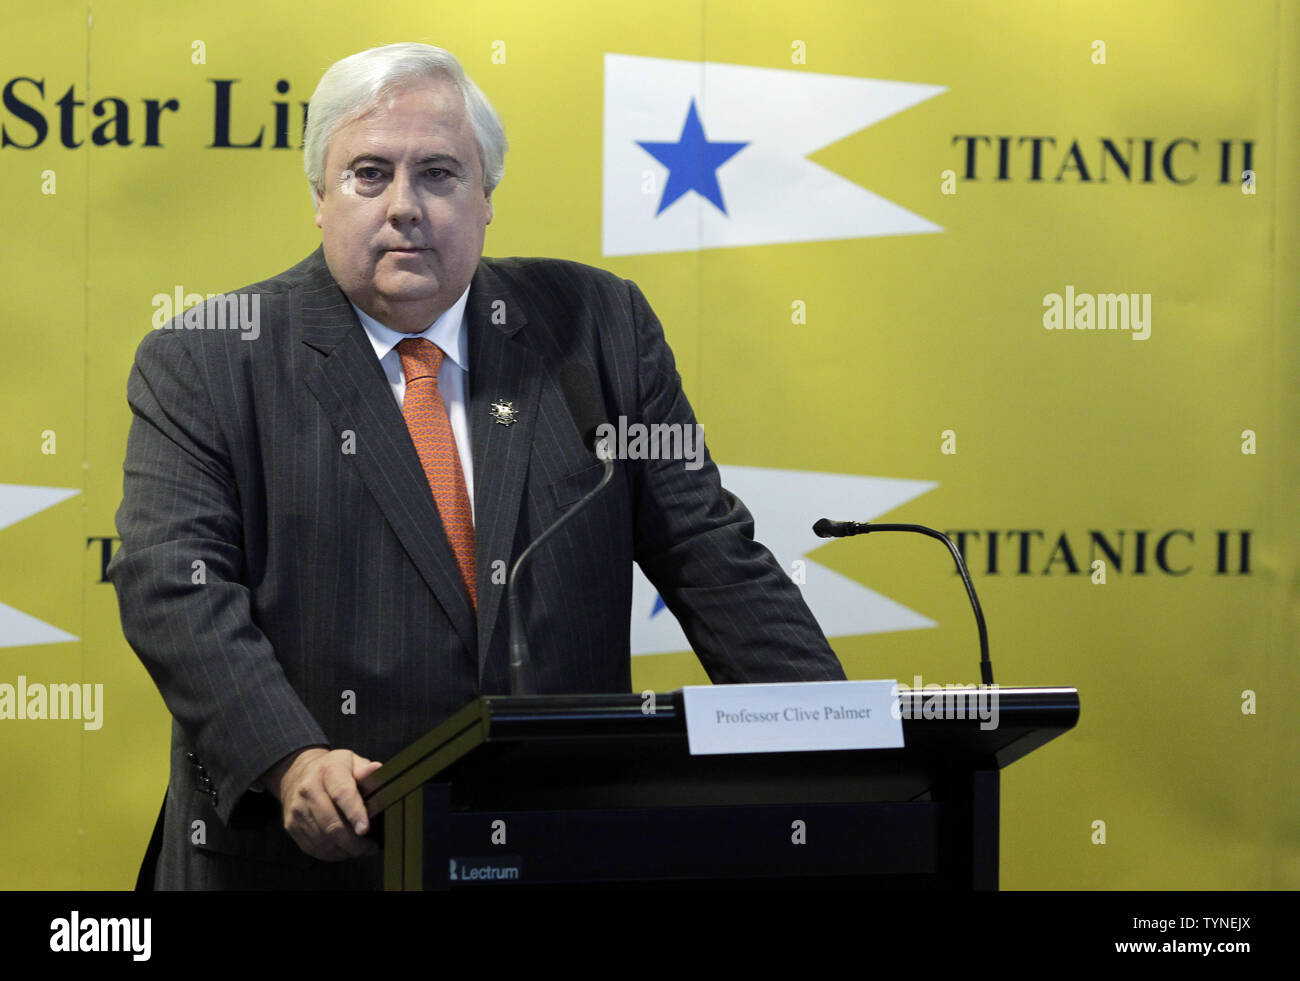 Australian billionaire chairman of the shipping company Blue Star Line, Clive Palmer, discusses plans for the company's planned Titanic II cruise ship at the Intrepid Sea, Air & Space Museum in